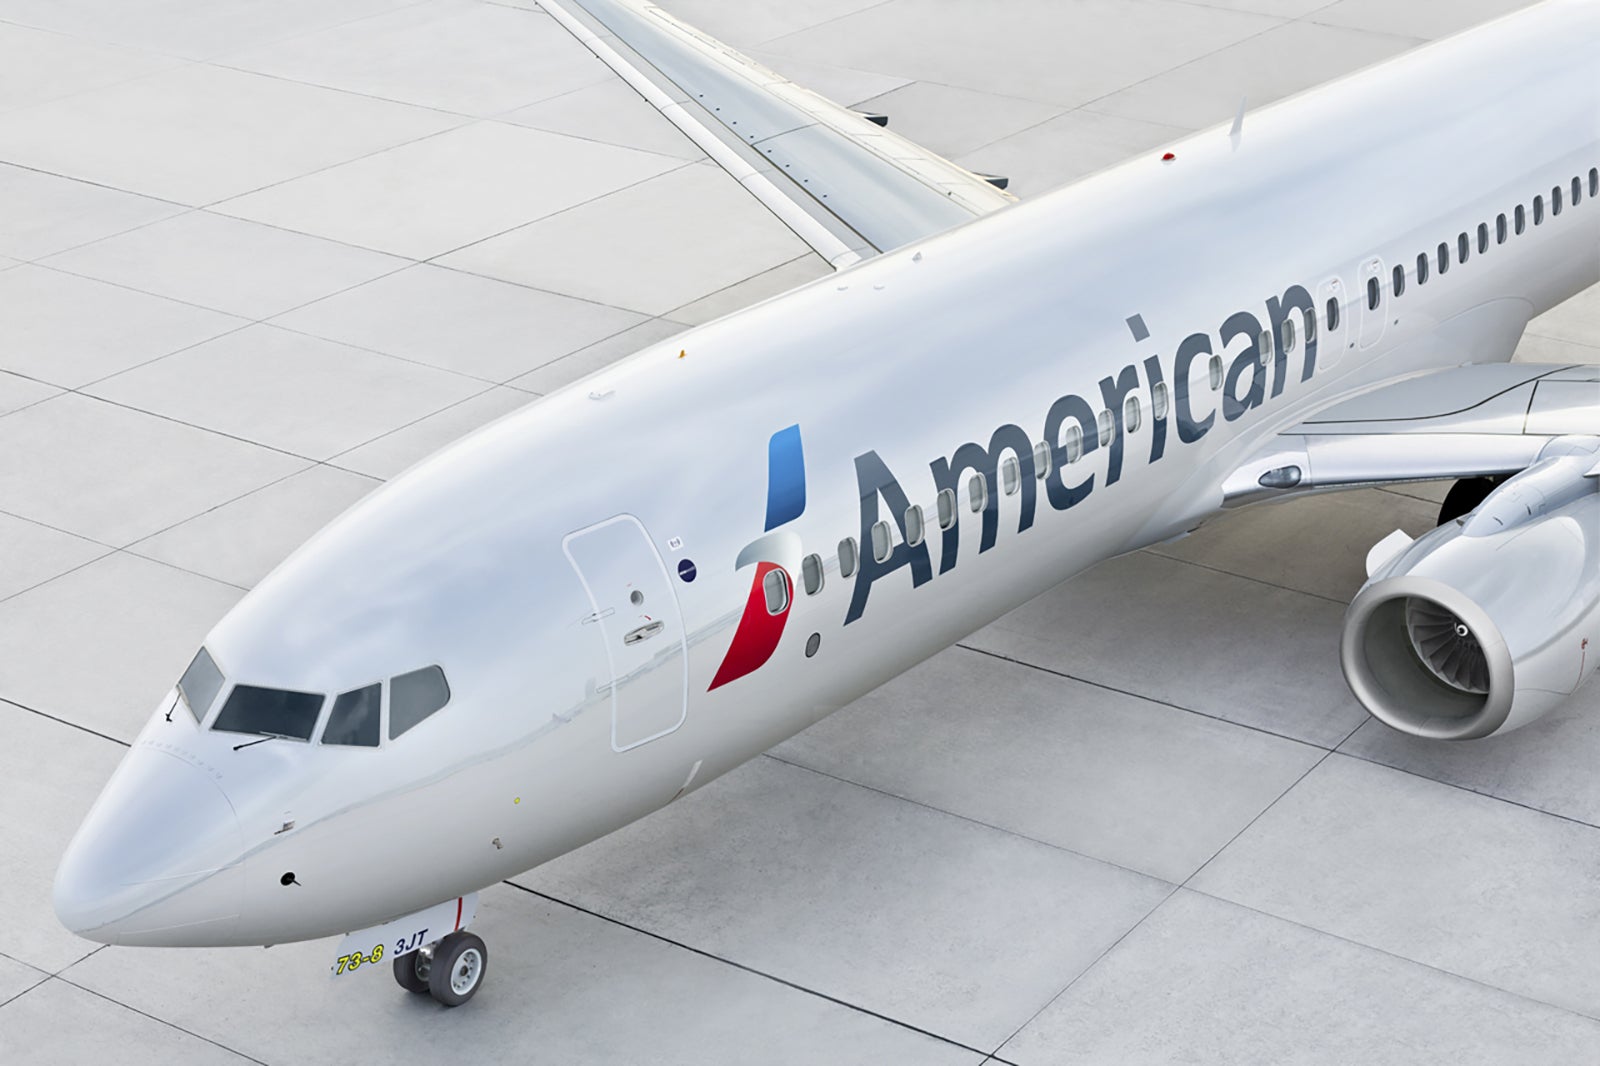 Aircraft, Aircrafts, American Airlines, plane, planes, Livery, Exterior